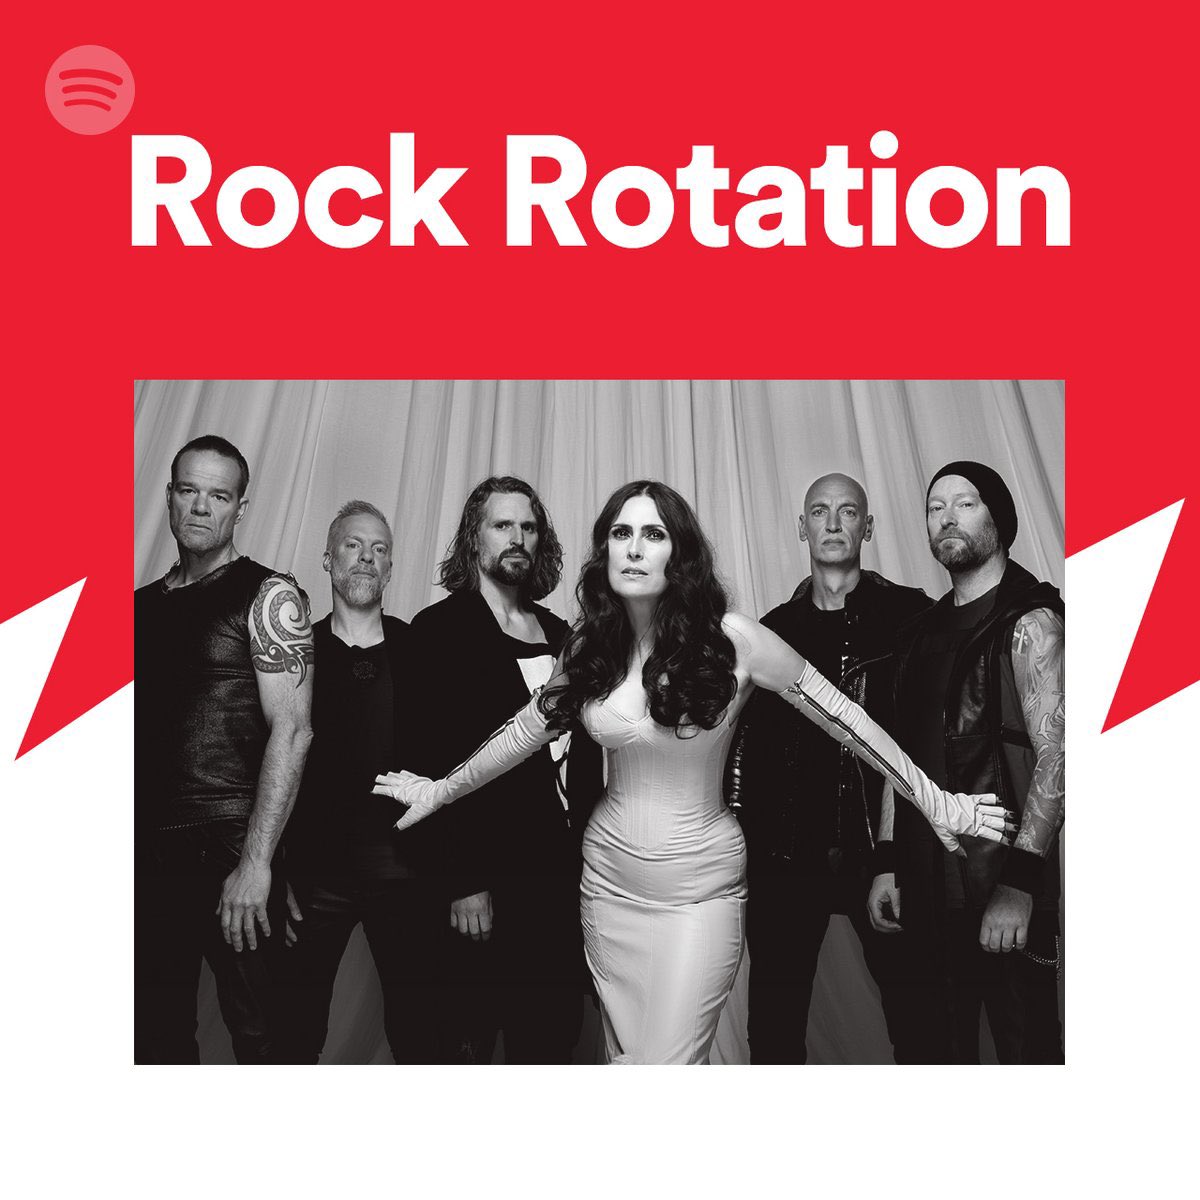 ICYMI: we are on the cover of Spotify’s ‘Rock Rotation’. You can now listen to our ‘A Fool’s Parade’ (feat. Alex Yarmak) in this playlist! We will donate all royalties of the song to Music Saves UA (for the duration of the war) so go and spin it: wt.lnk.to/rockrotation